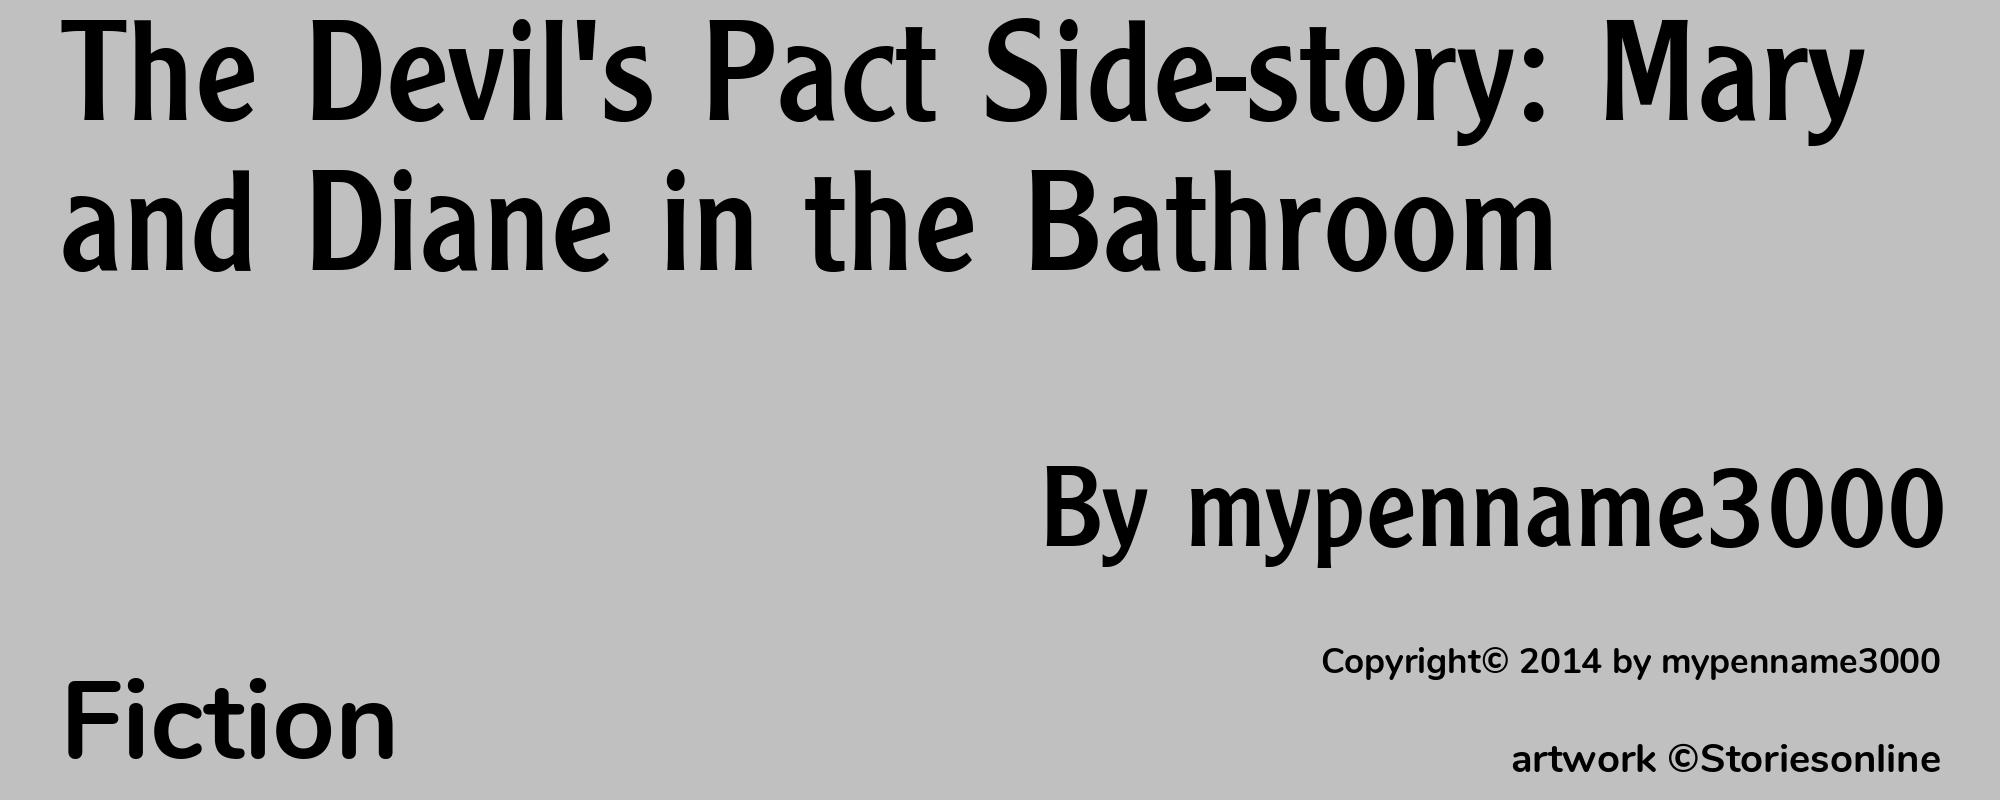 The Devil's Pact Side-story: Mary and Diane in the Bathroom - Cover